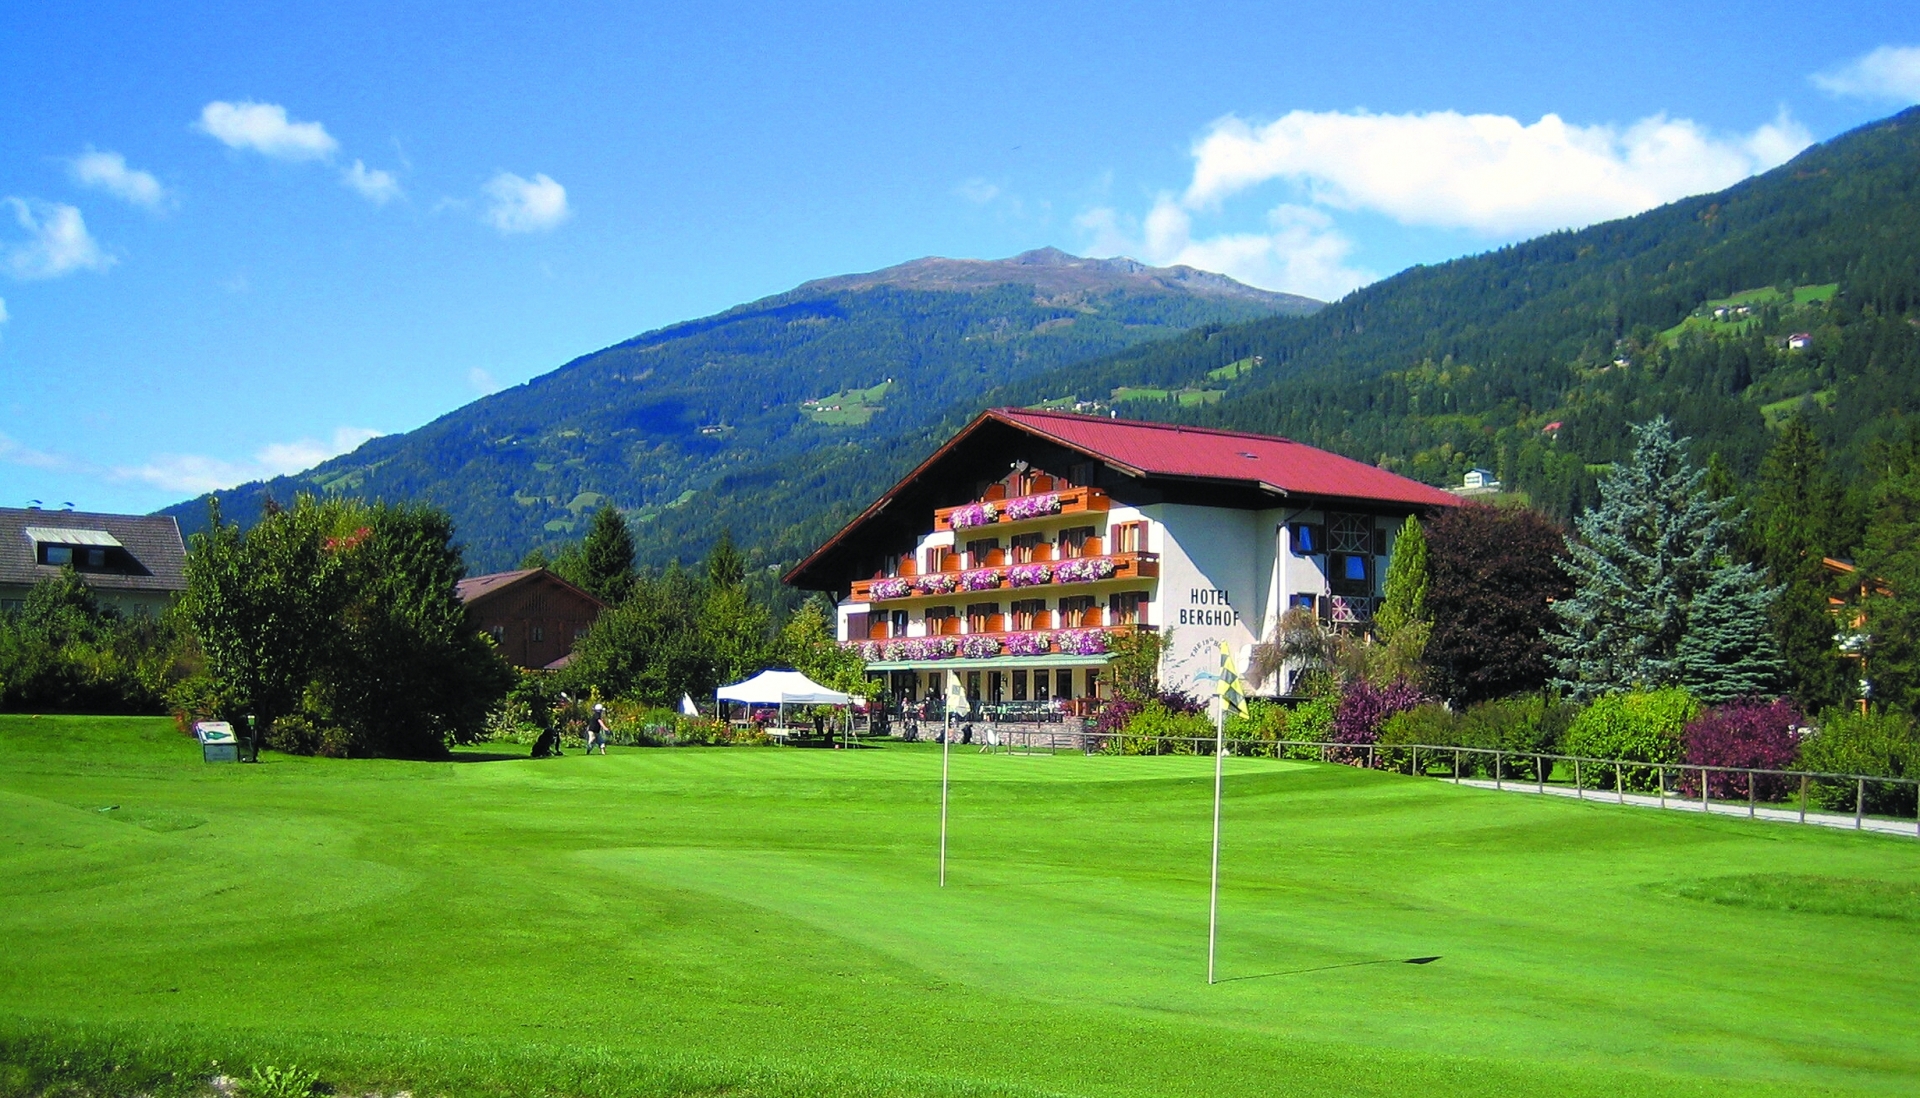 Golfhotel Berghof <br/>82.50 ew <br/> <a href='http://vakantieoplossing.nl/outpage/?id=54b4b17d94f4c04883e2f10c2393349d' target='_blank'>View Details</a>